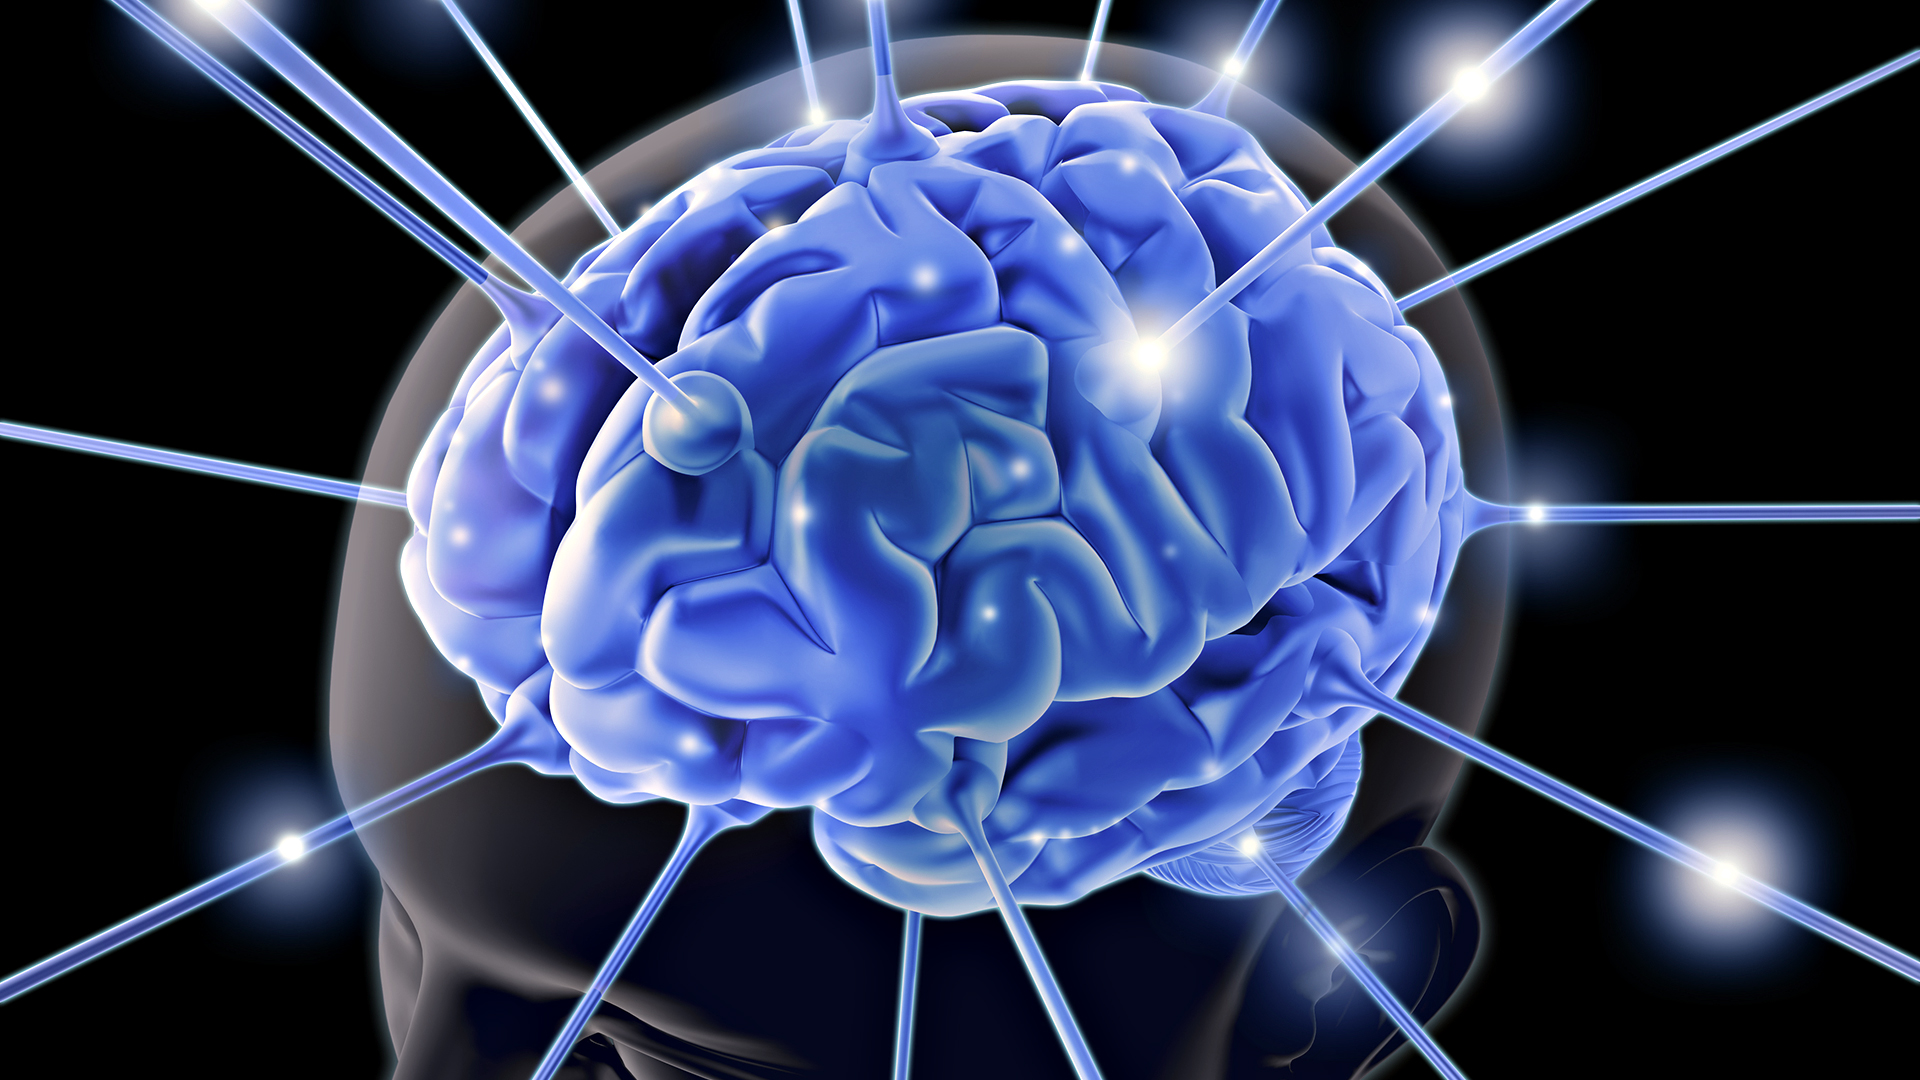 Image showing a brain with electrical pulses.